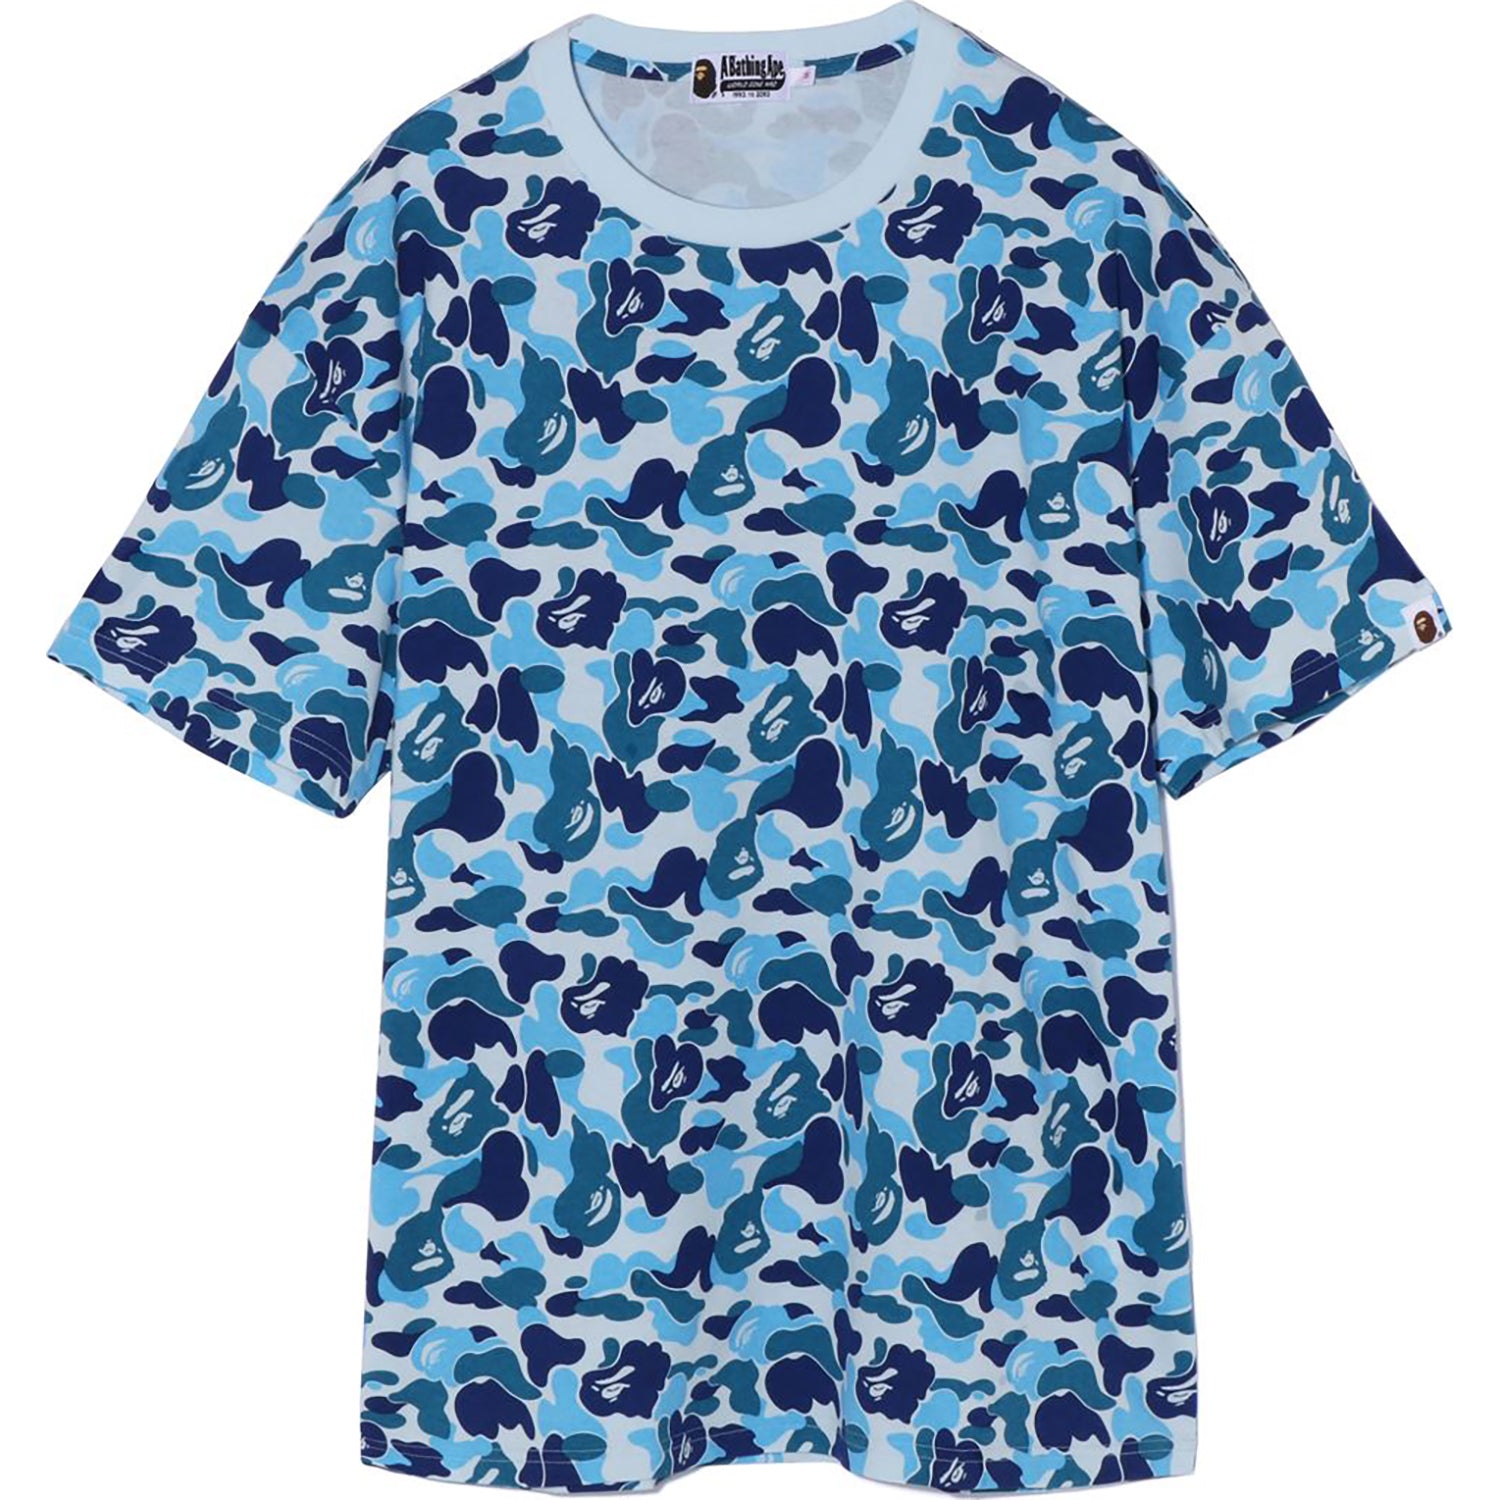 ABC CAMO TEE RELAXED FIT LADIES – us.bape.com